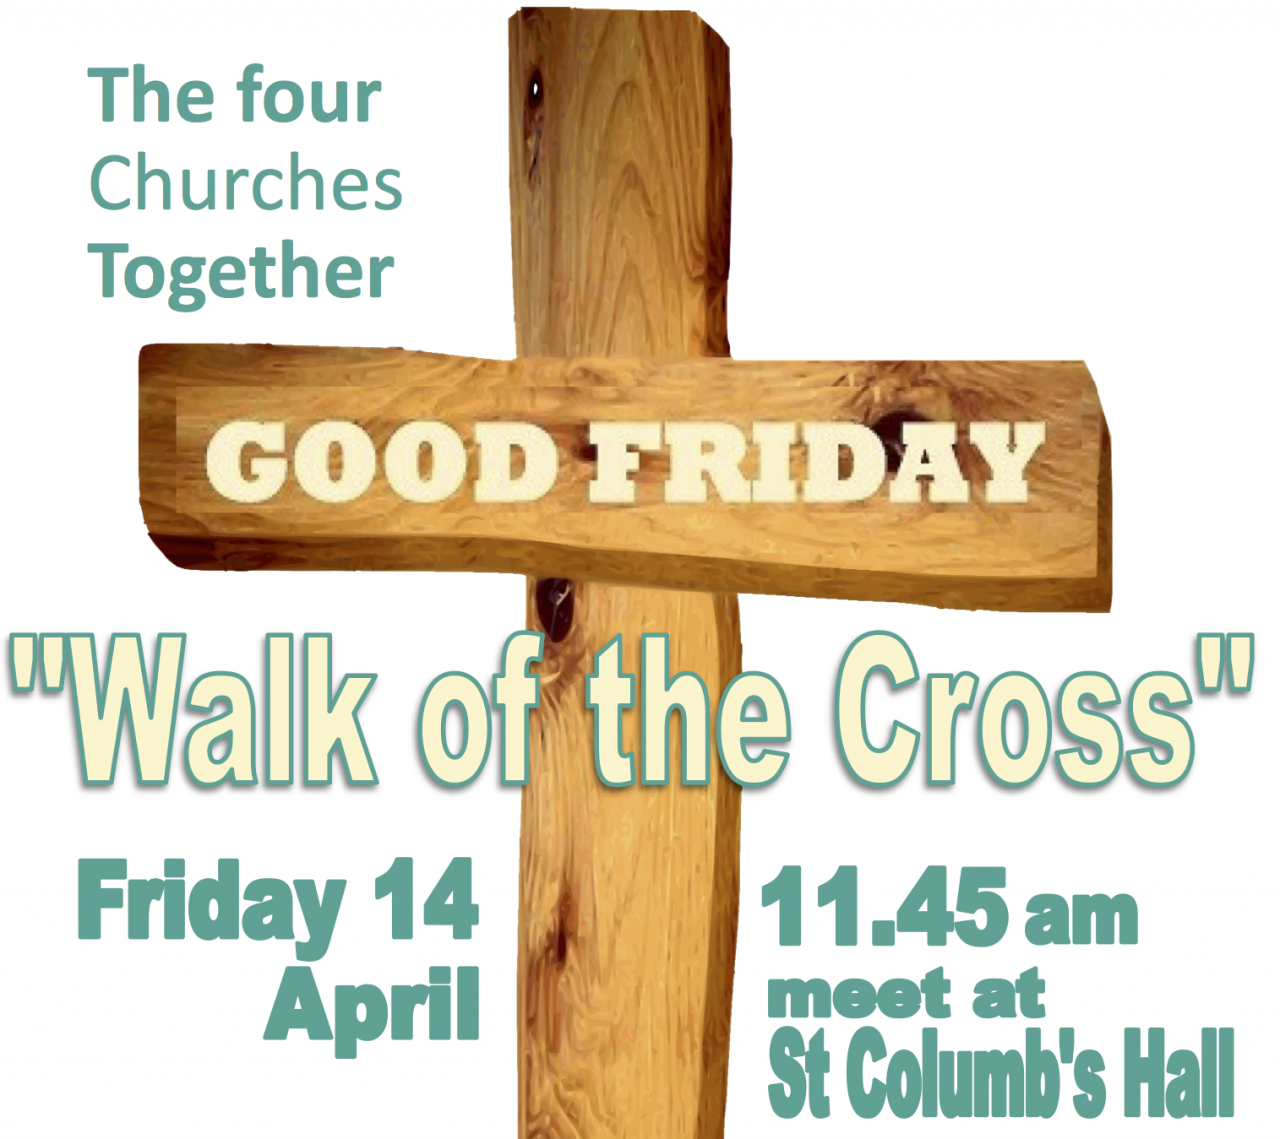 Walk of the Cross - Good Friday - Derry - 4 Churches Together